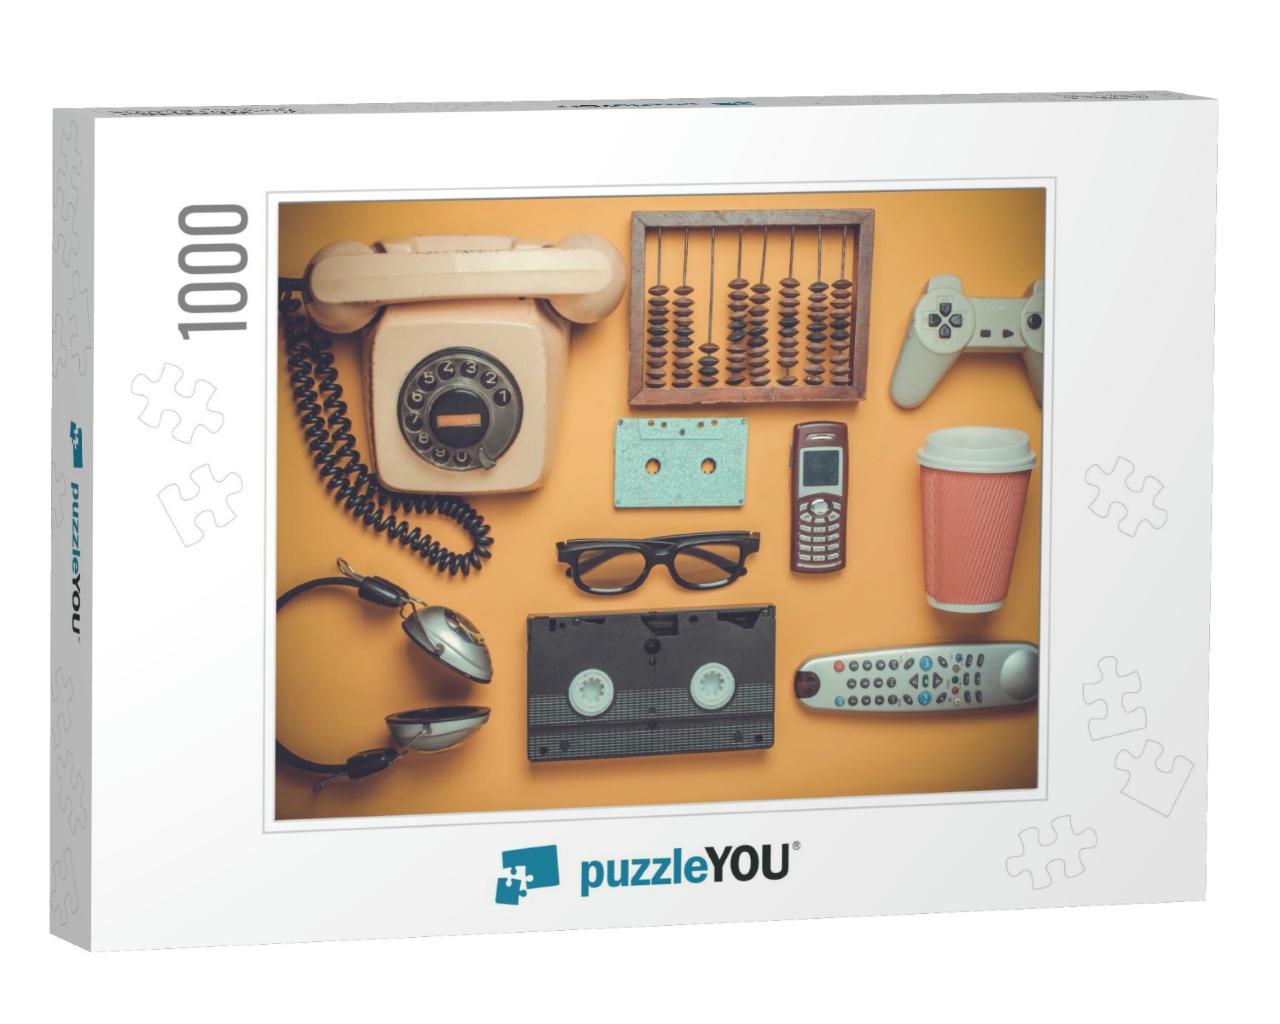 Retro Objects on a Yellow Background. Rotary Telephone, A... Jigsaw Puzzle with 1000 pieces